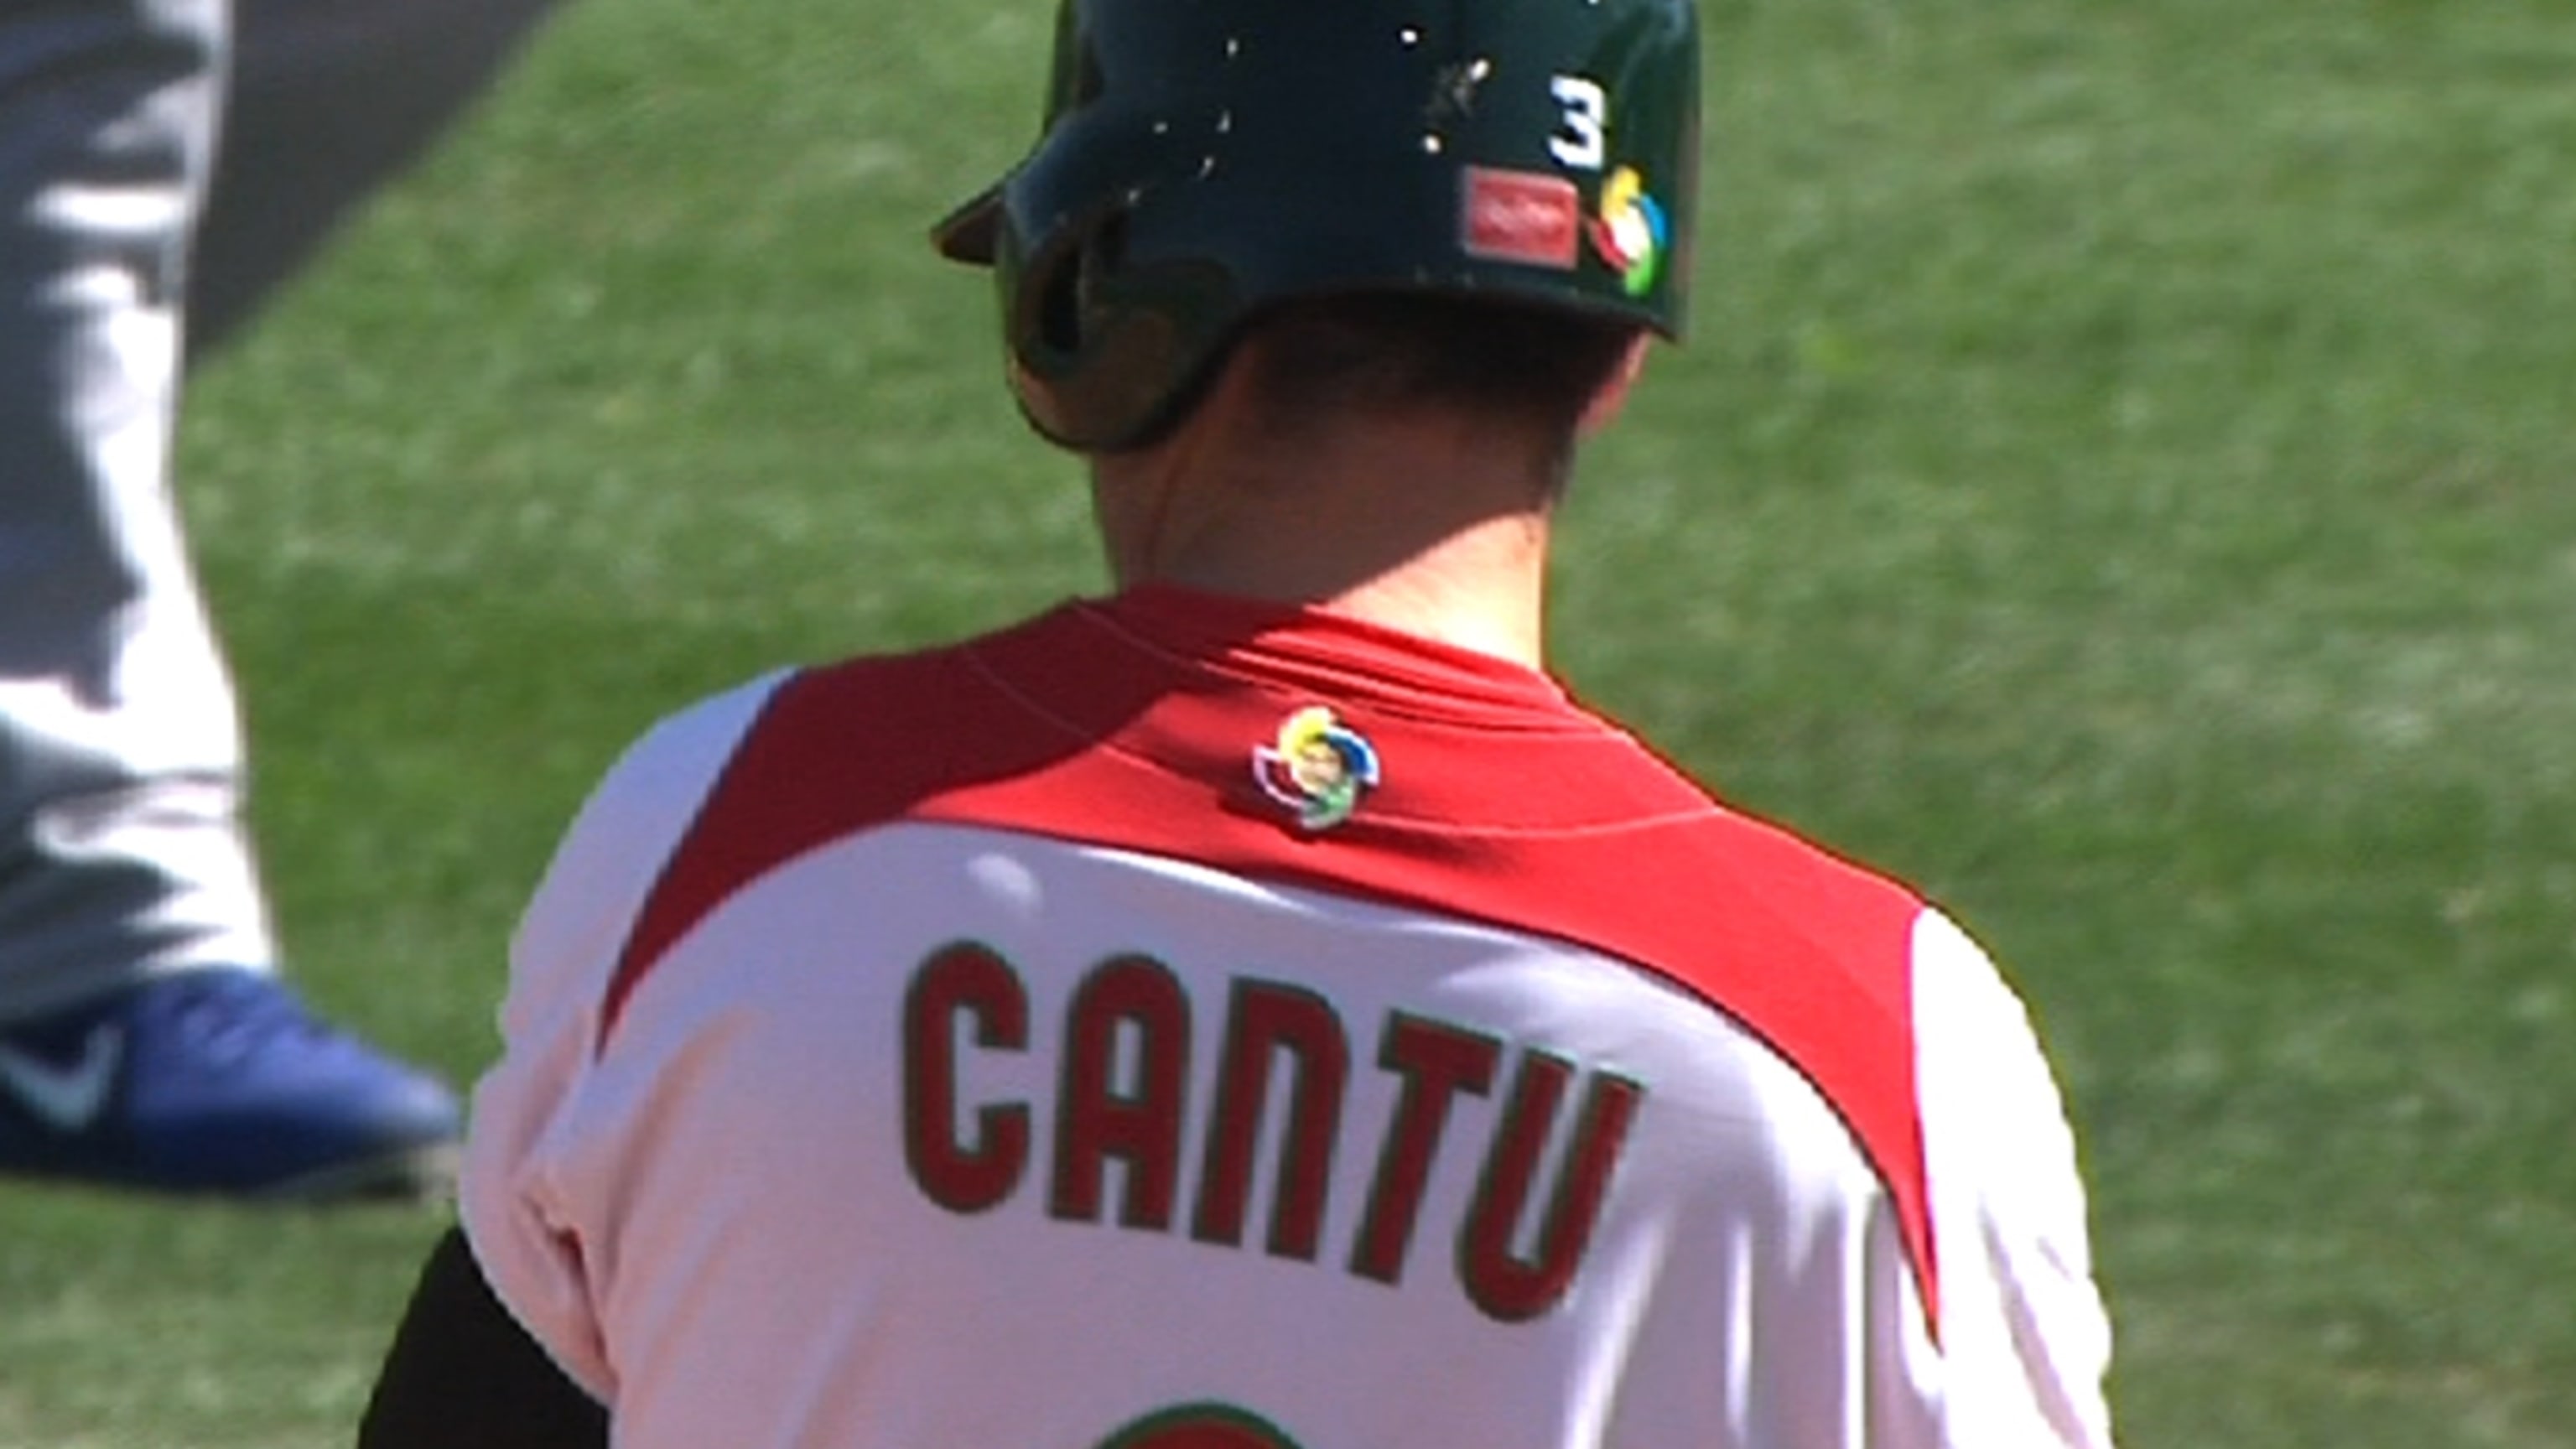 Cantu's bases-clearing double